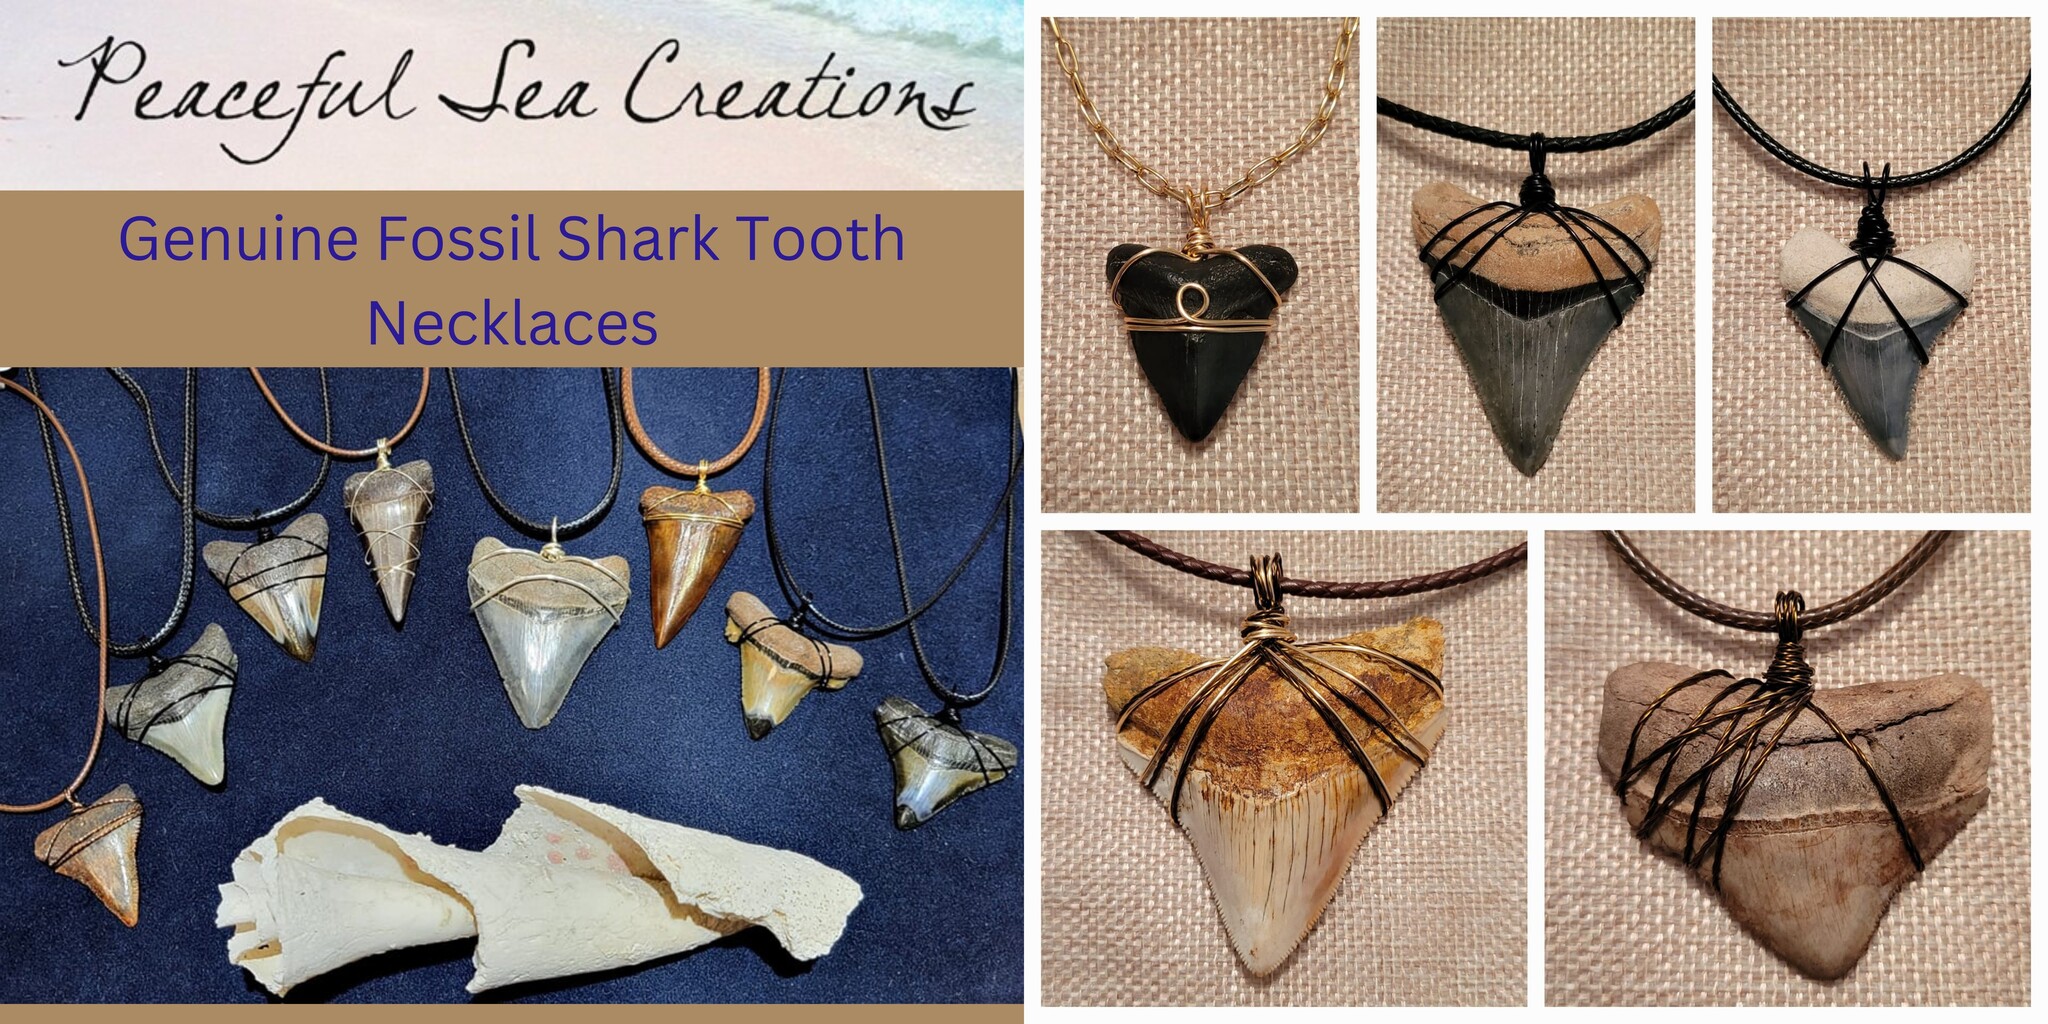 Genuine Fossil Shark Tooth Necklaces